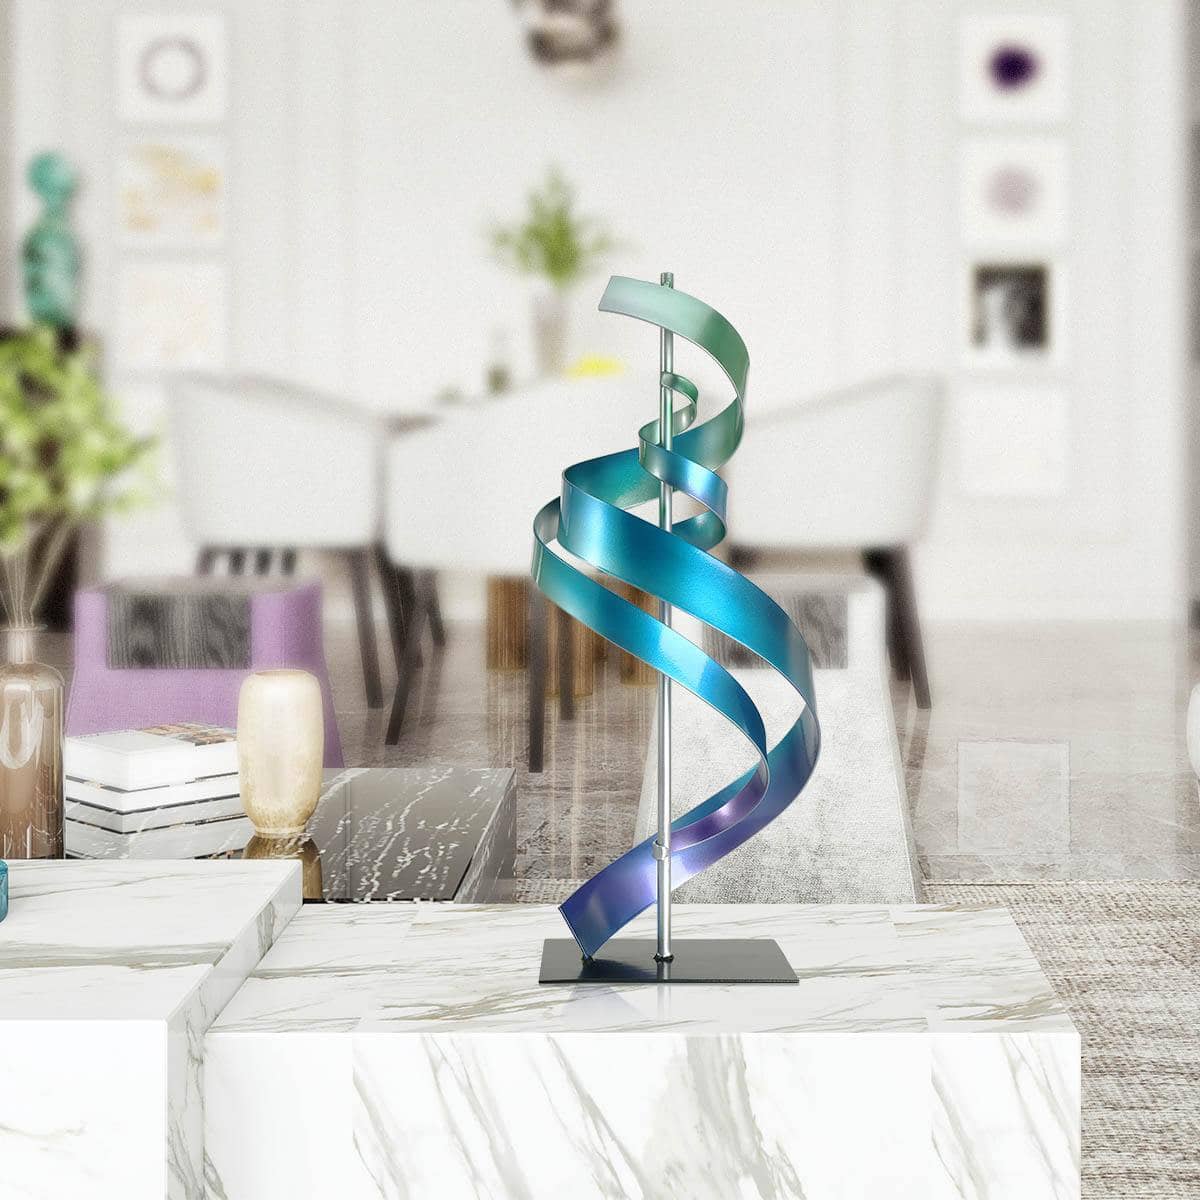 Elegant Abstract Ornament Sculpture: Transform Your Home with Modern Art